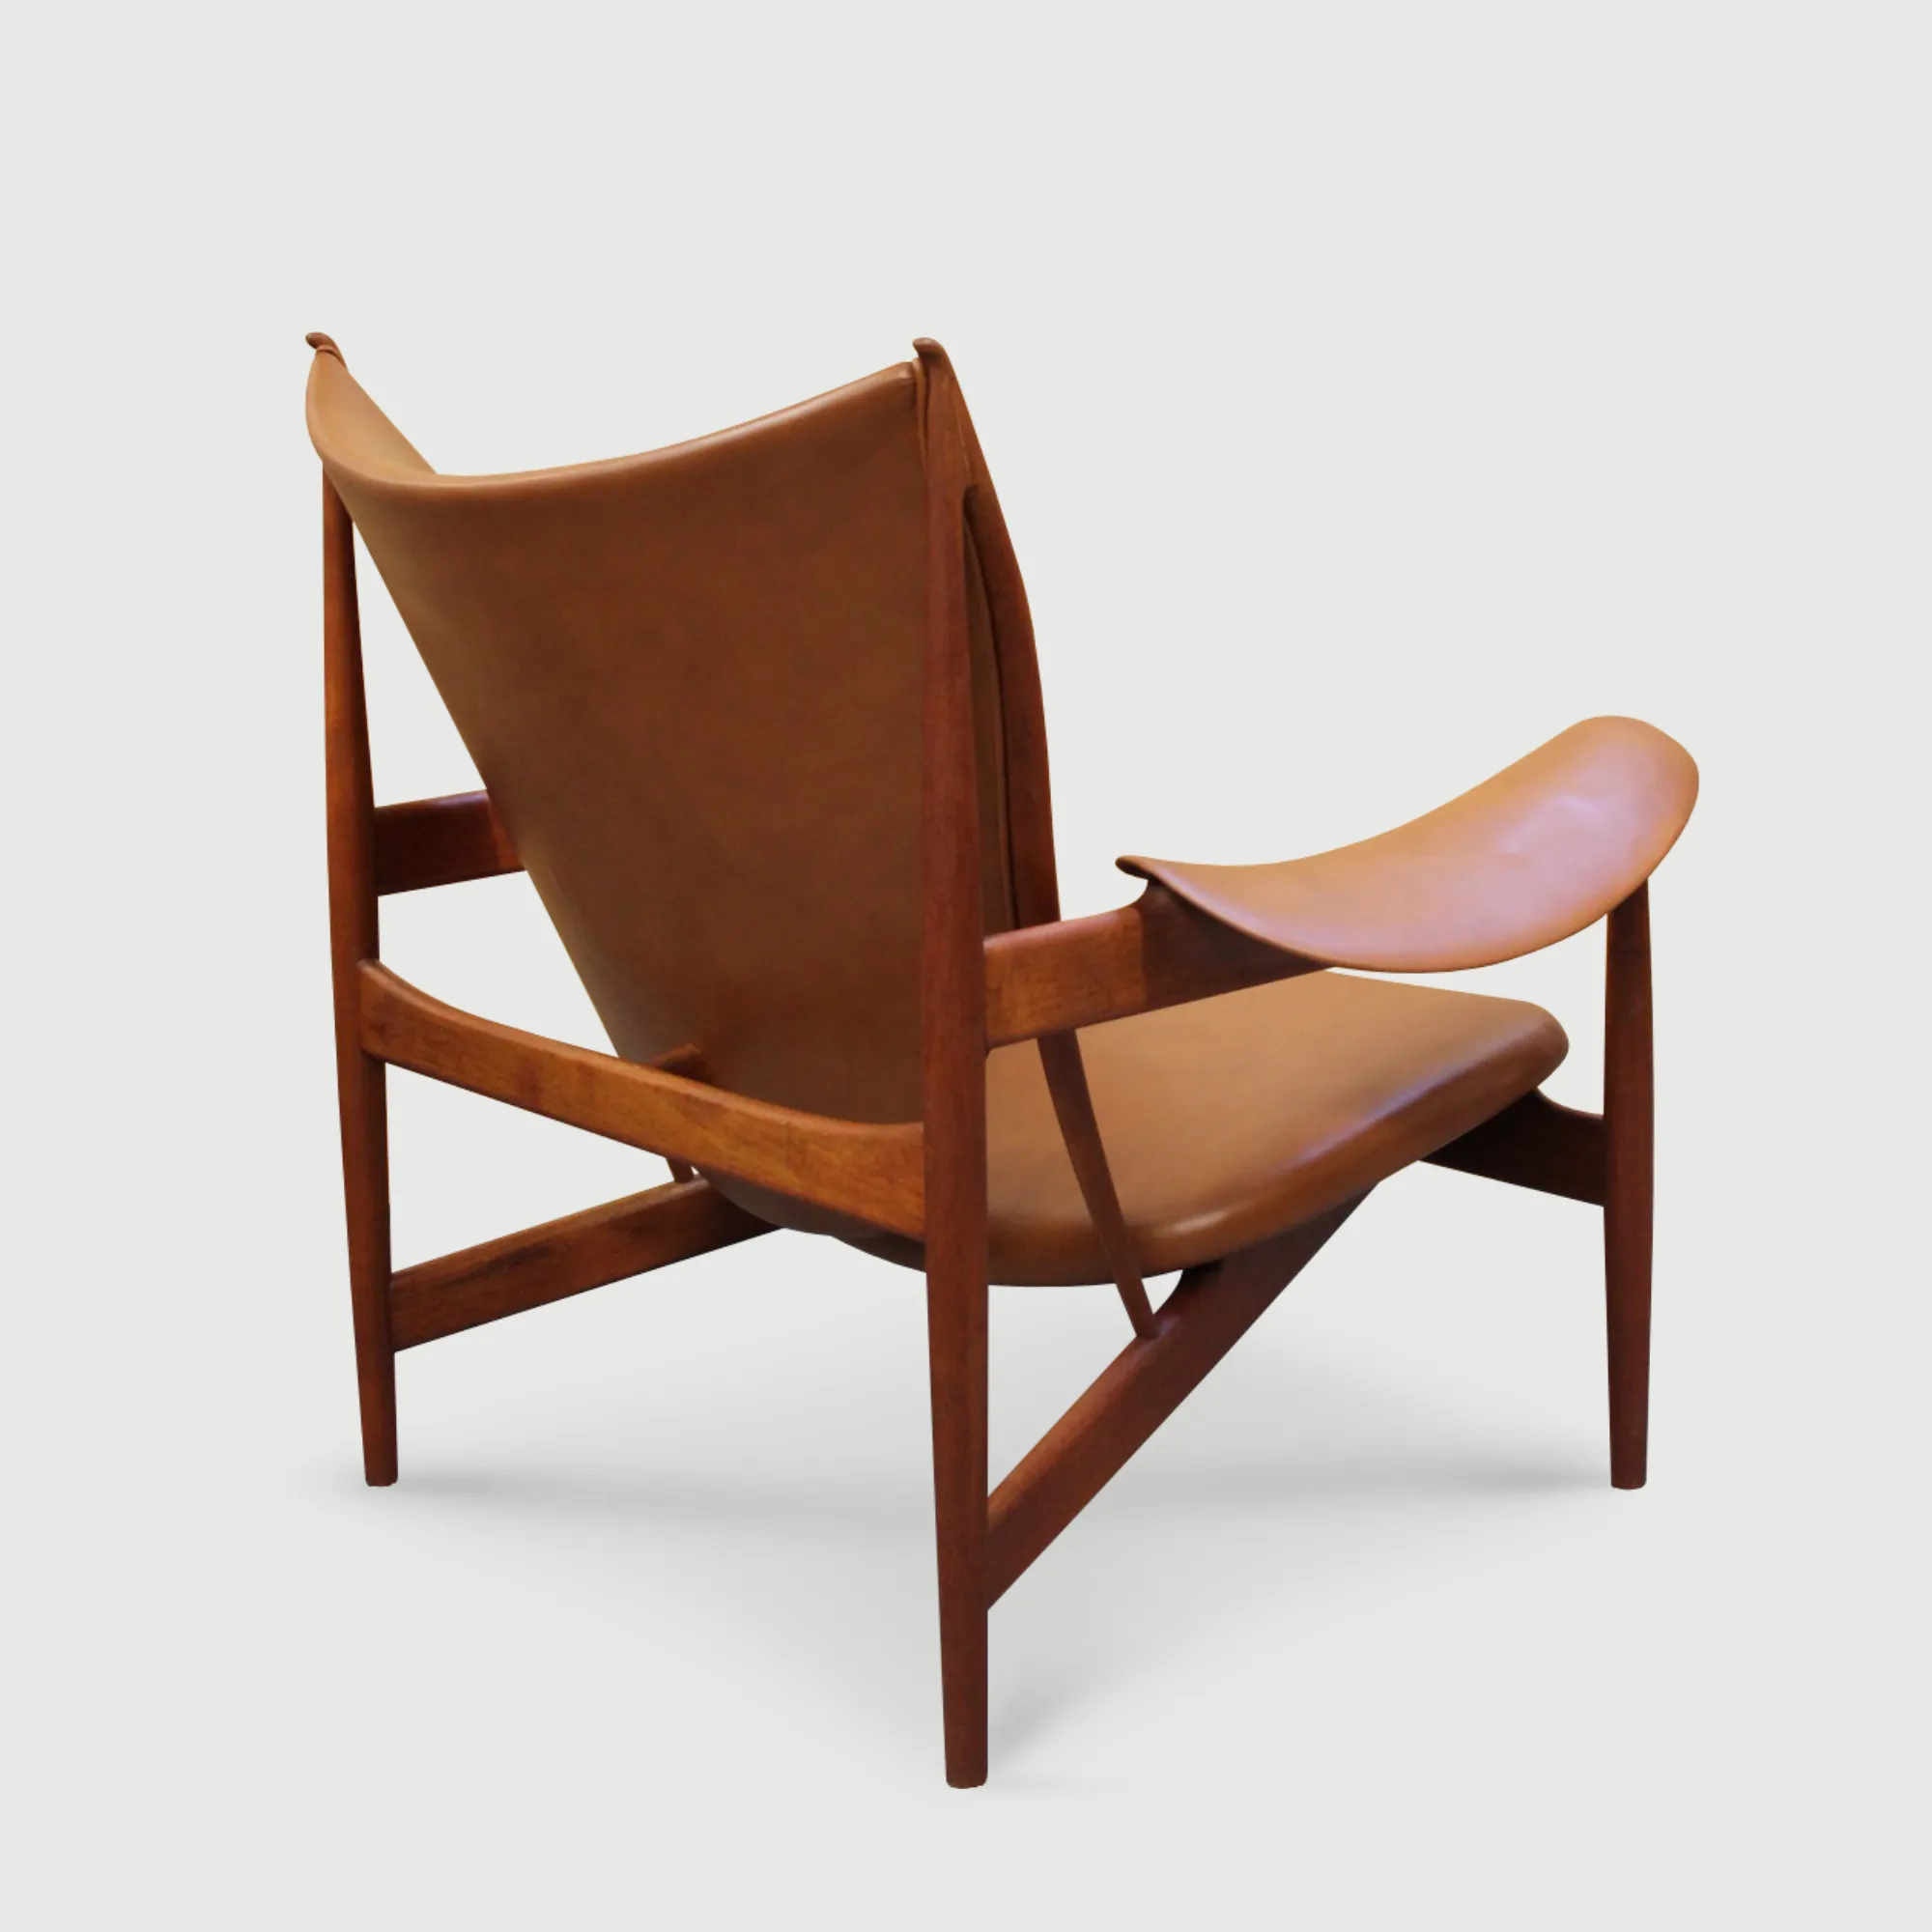 Finn Juhl Chieftan chair with restored brown leather upholstery and dark wood